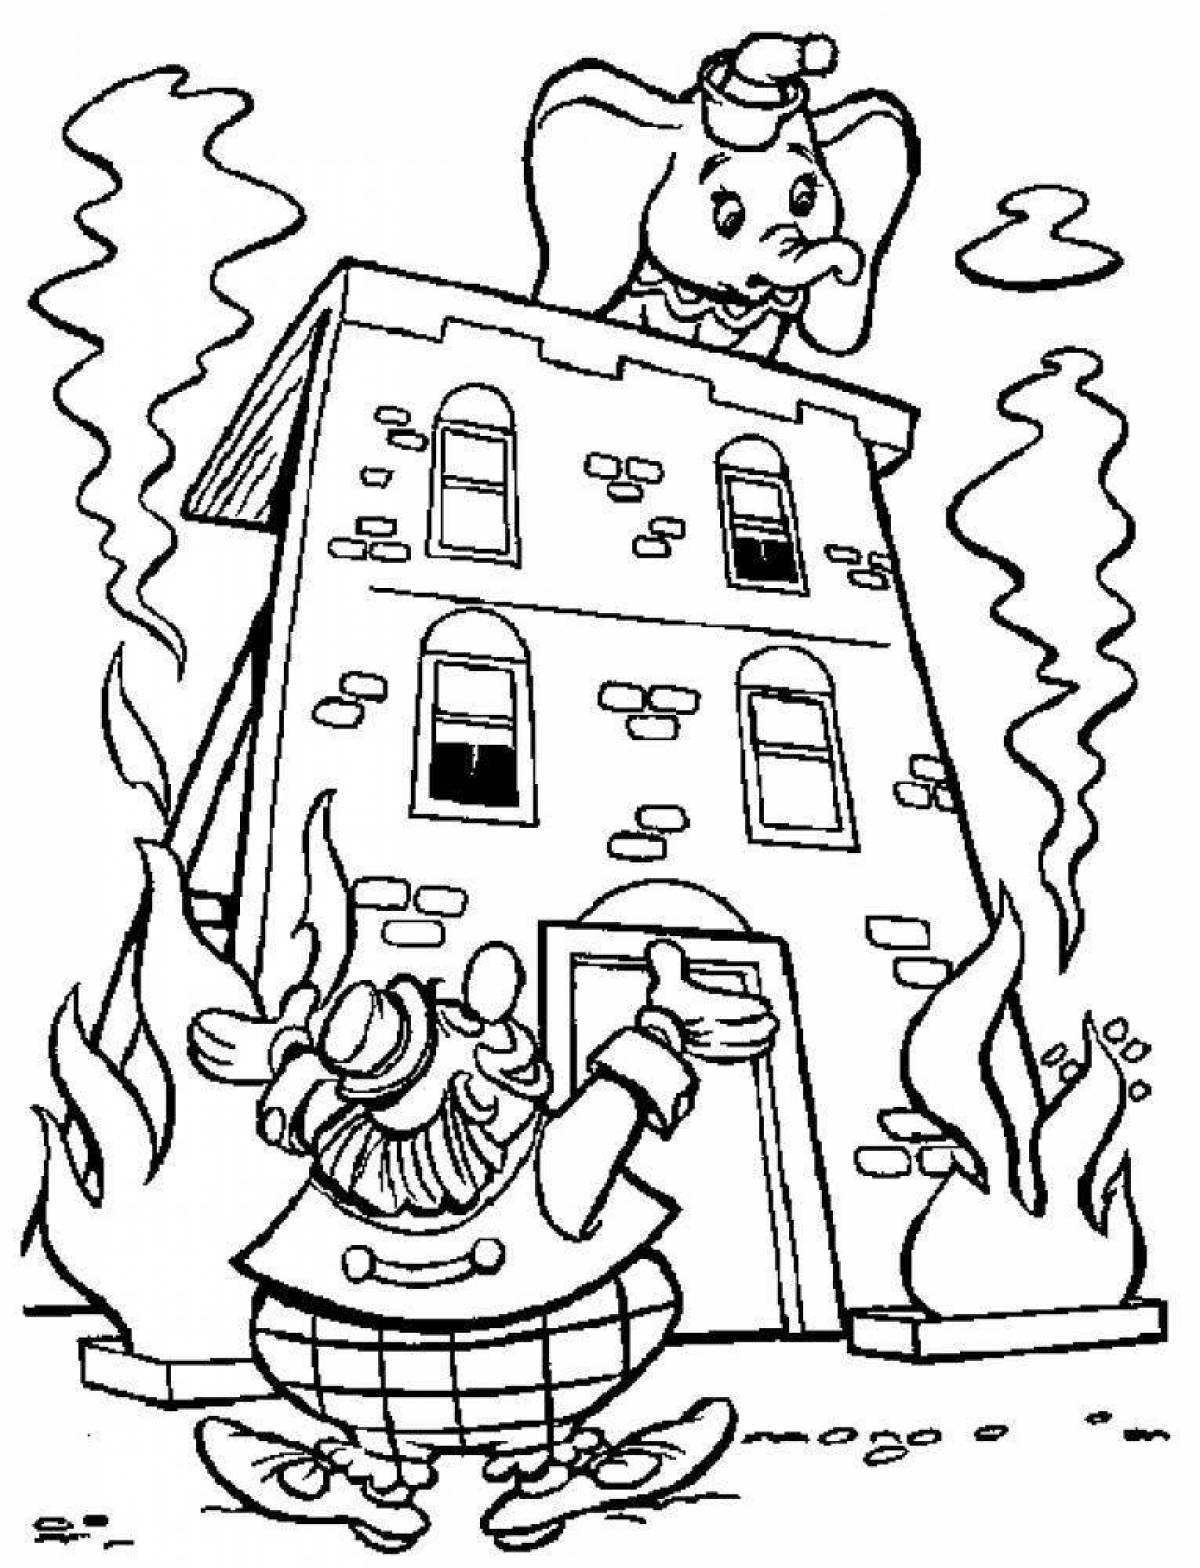 Cute fire safety coloring page